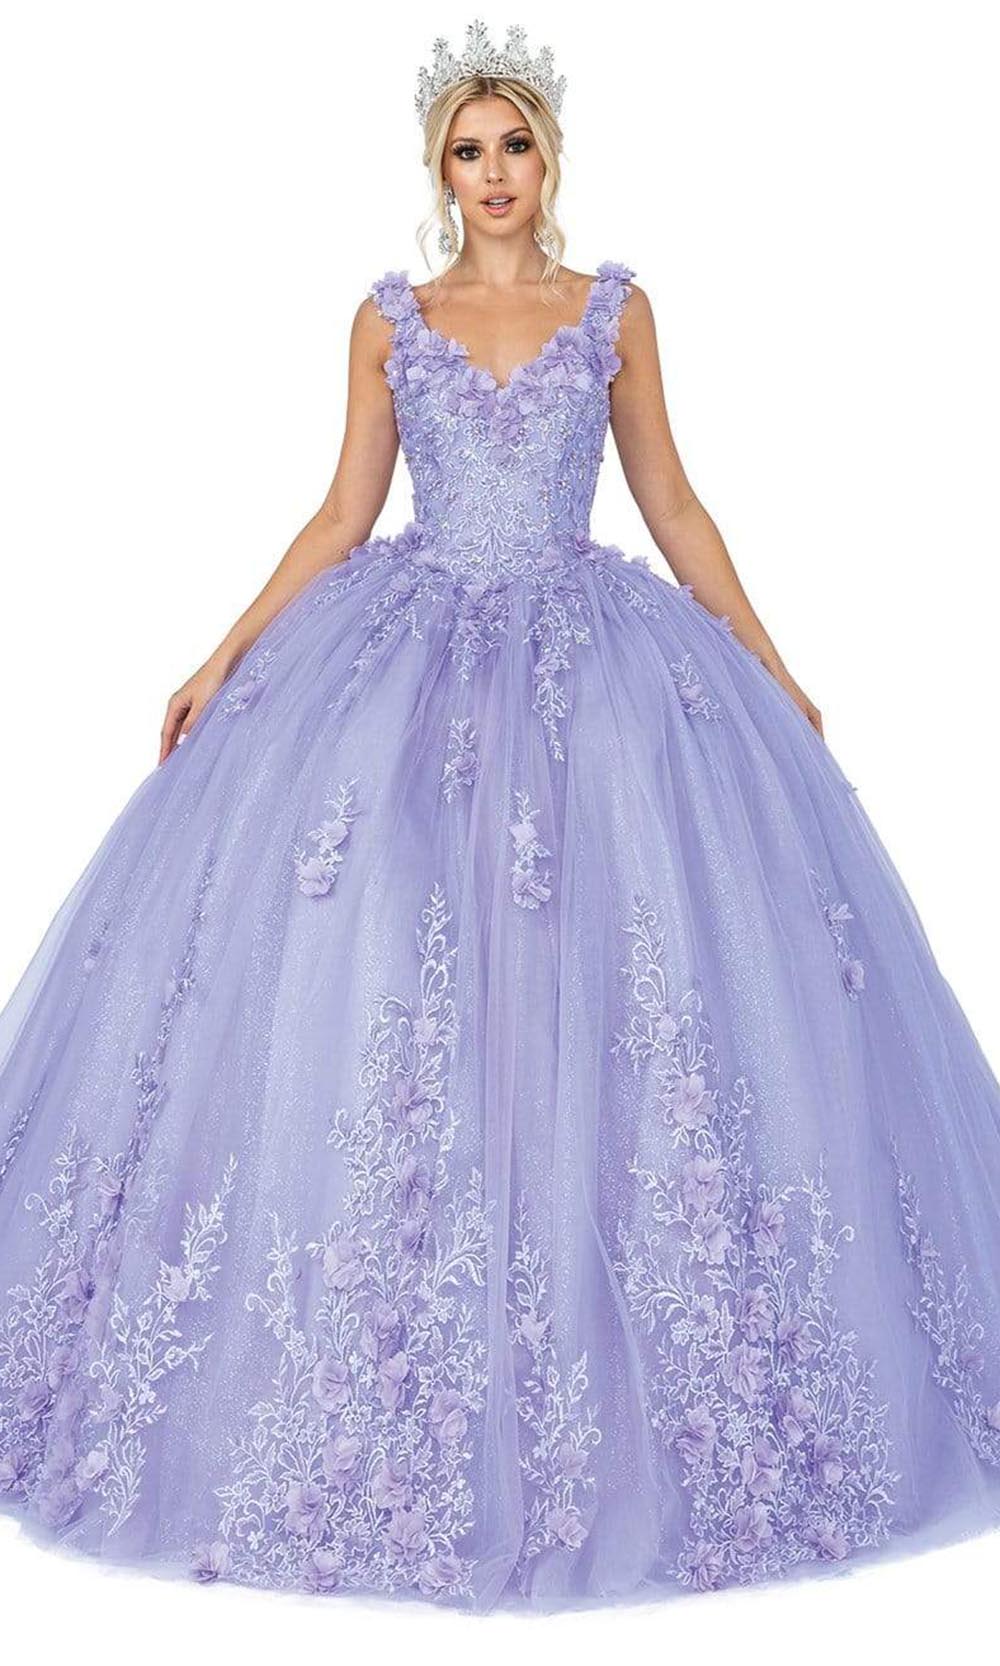 Image of Dancing Queen - 1623 V Neck Floral Glittered Ballgown